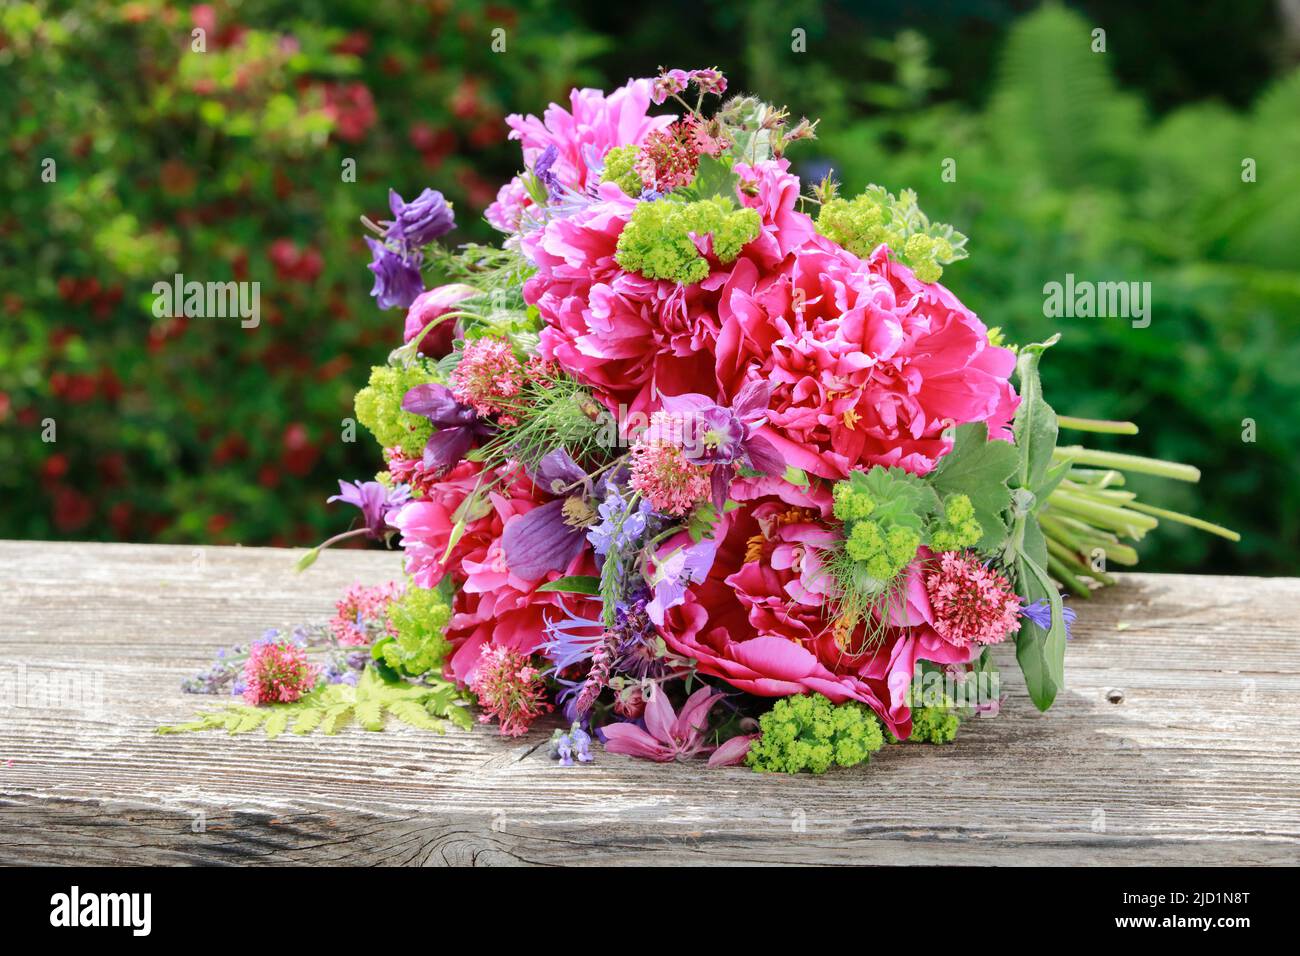 Colourful bouquet of flowers in red, pink and purple shades with peonies and columbines, lying on weathered wooden board in the garden Stock Photo